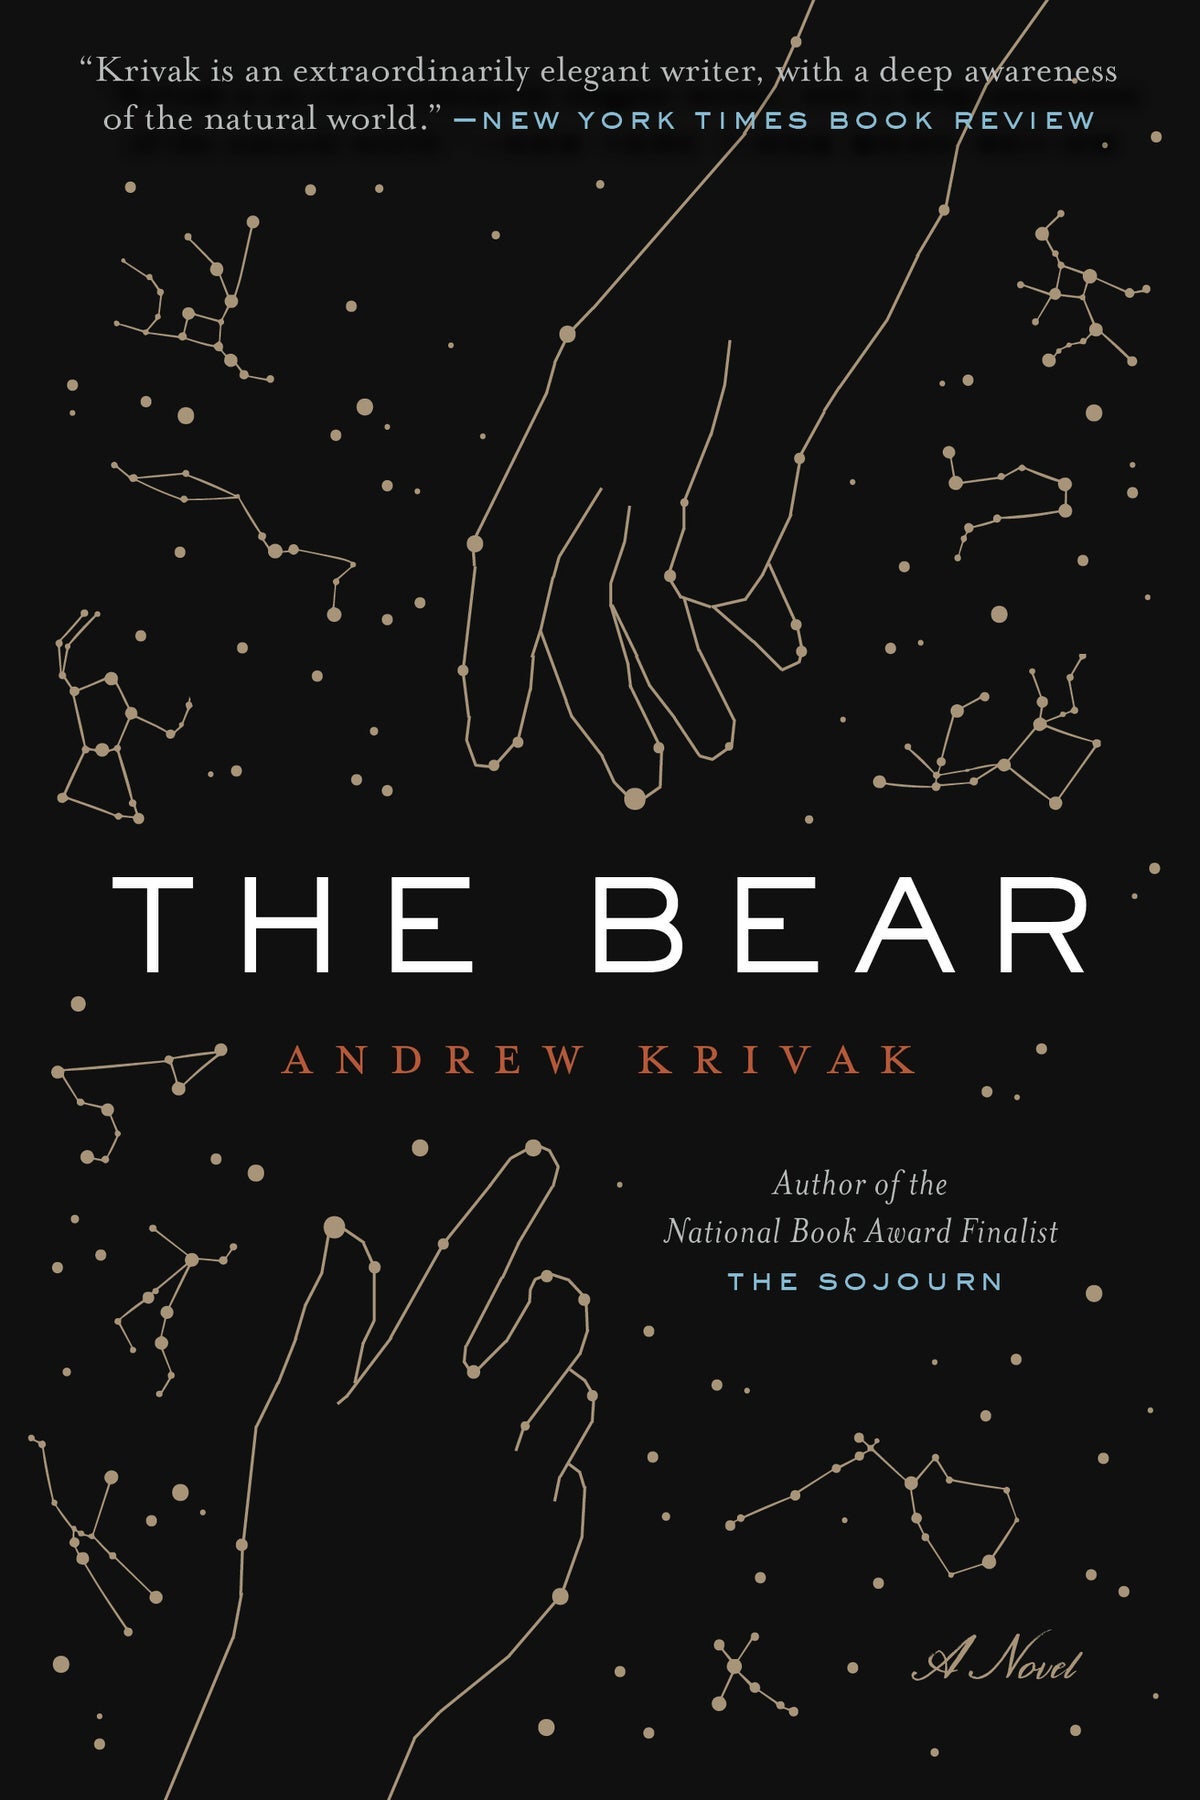 The cover of The Bear features constellations, including of two hands reaching for each other.